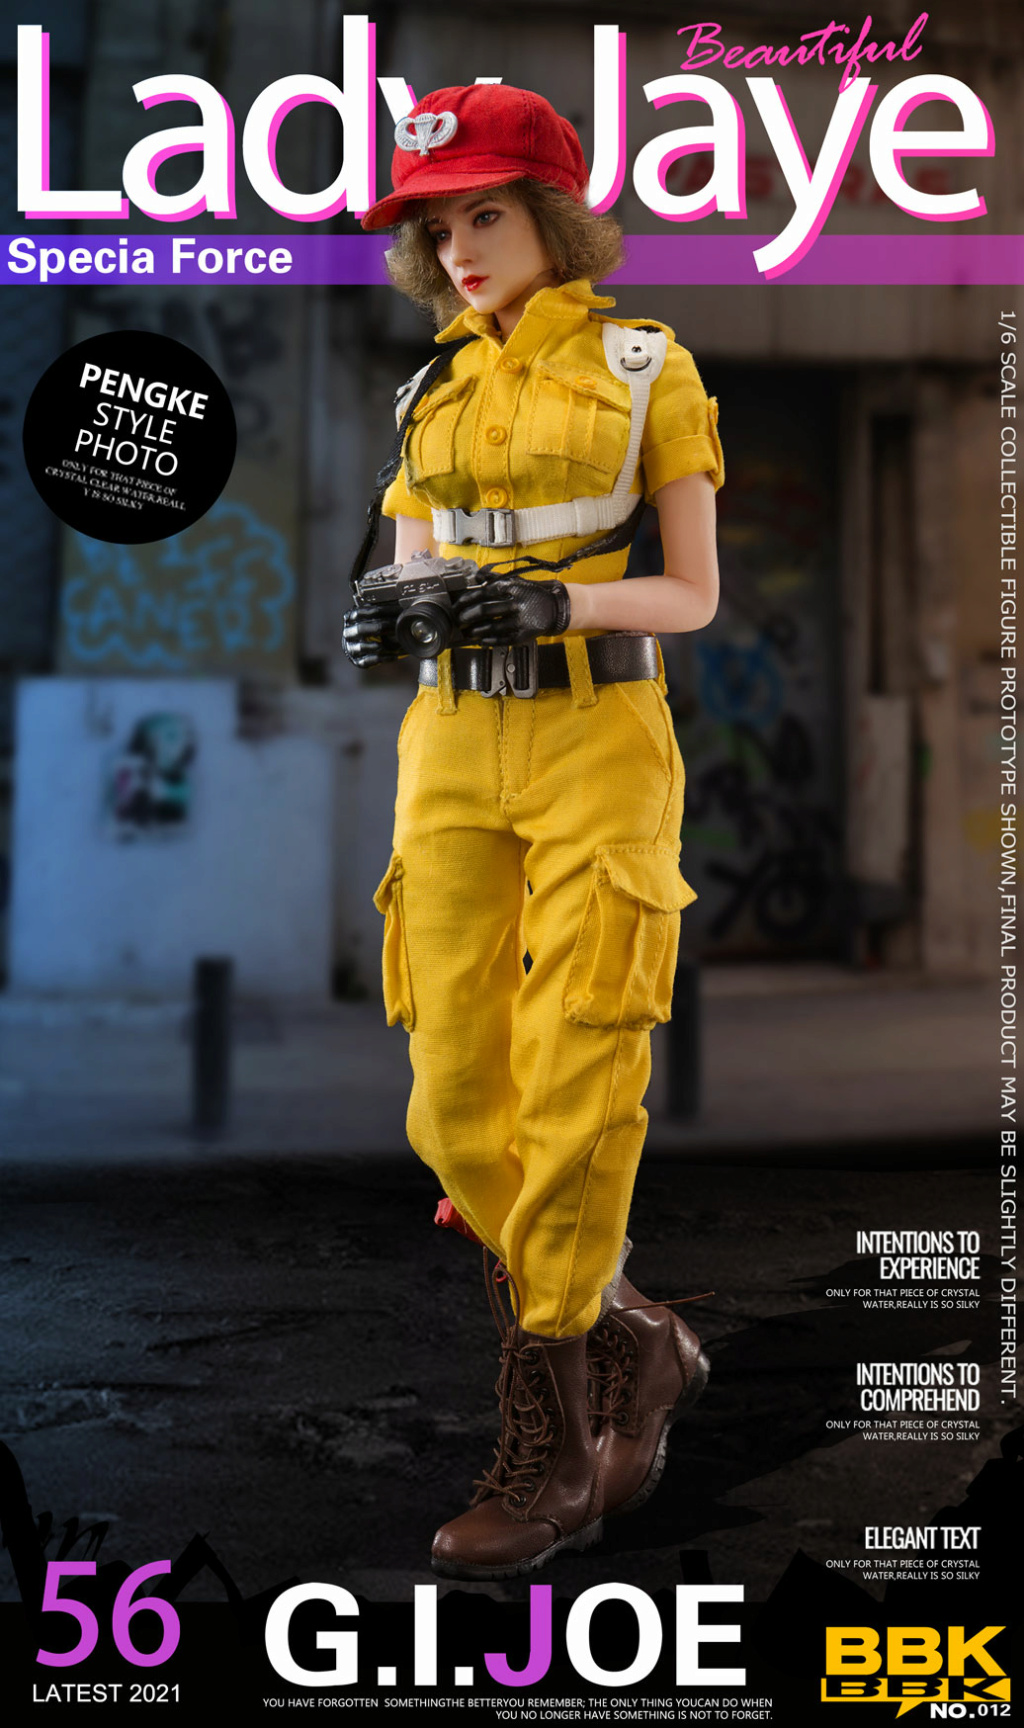 NEW PRODUCT: BBK: 1/6 GIJOE Jay Female Soldier Action Figure# 14580013